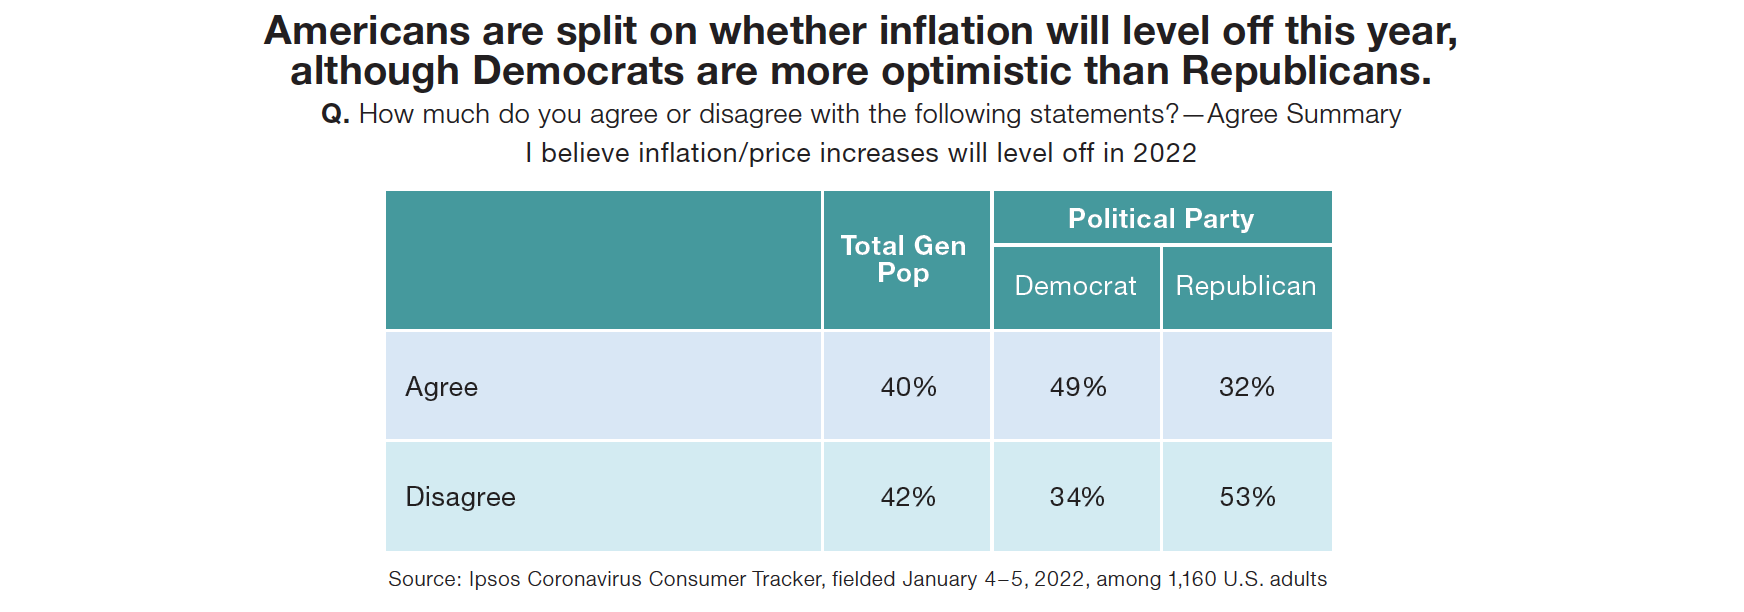 Americans are split on whether inflation will level off this year, although Democrats are more optimistic than Republicans.